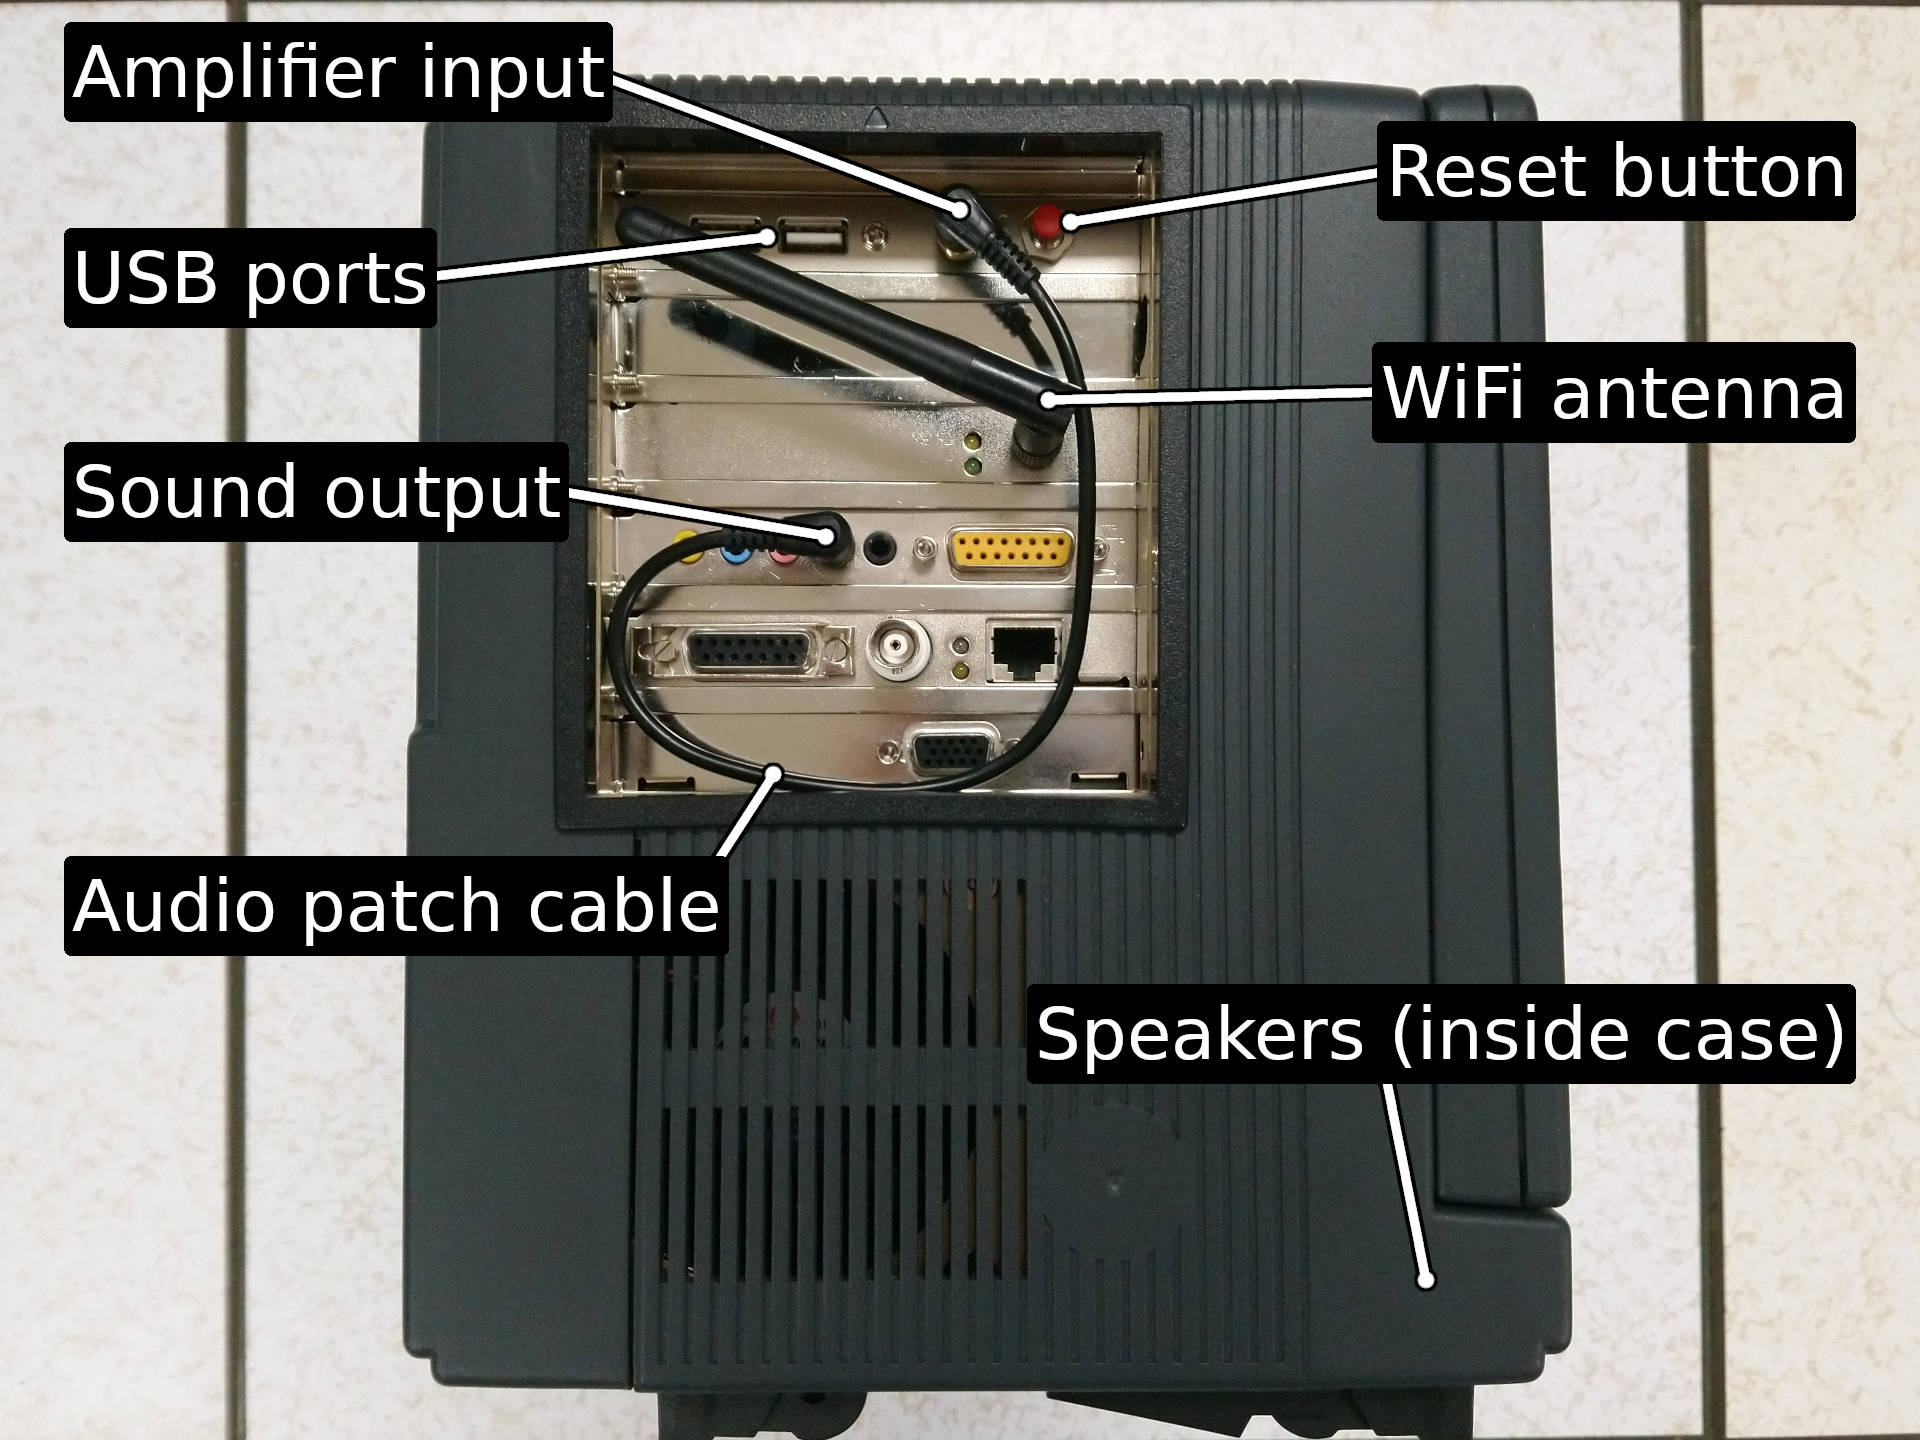 Side view of case showing new parts